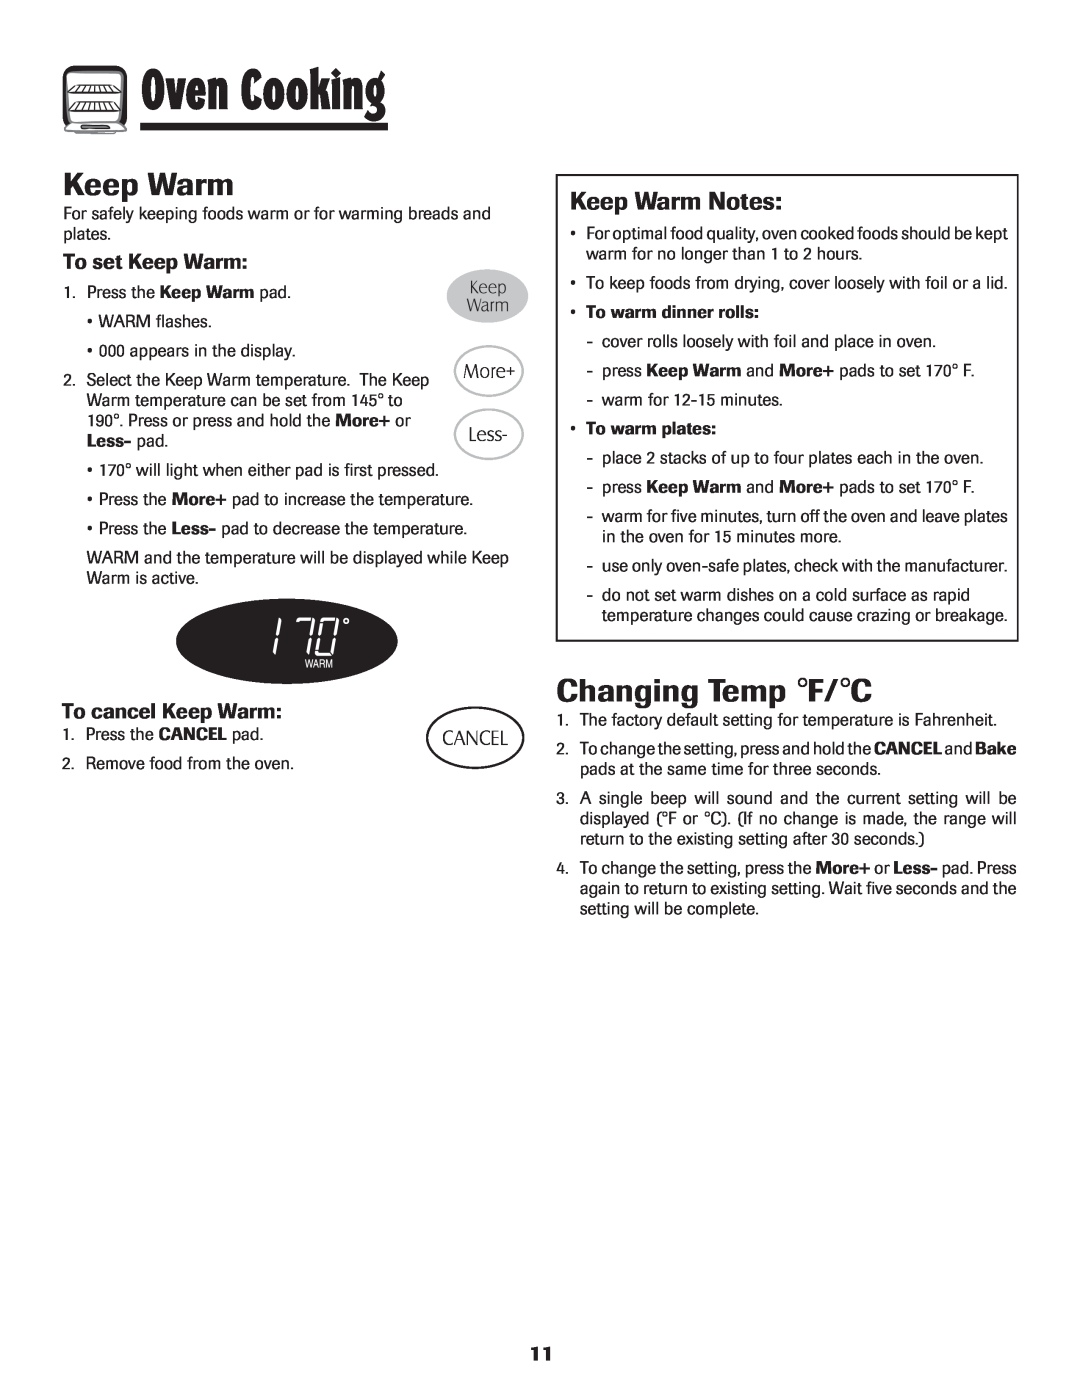 Maytag Gas - Precision Touch Control 500 Range Changing Temp F/C, Keep Warm Notes, To set Keep Warm, Oven Cooking 